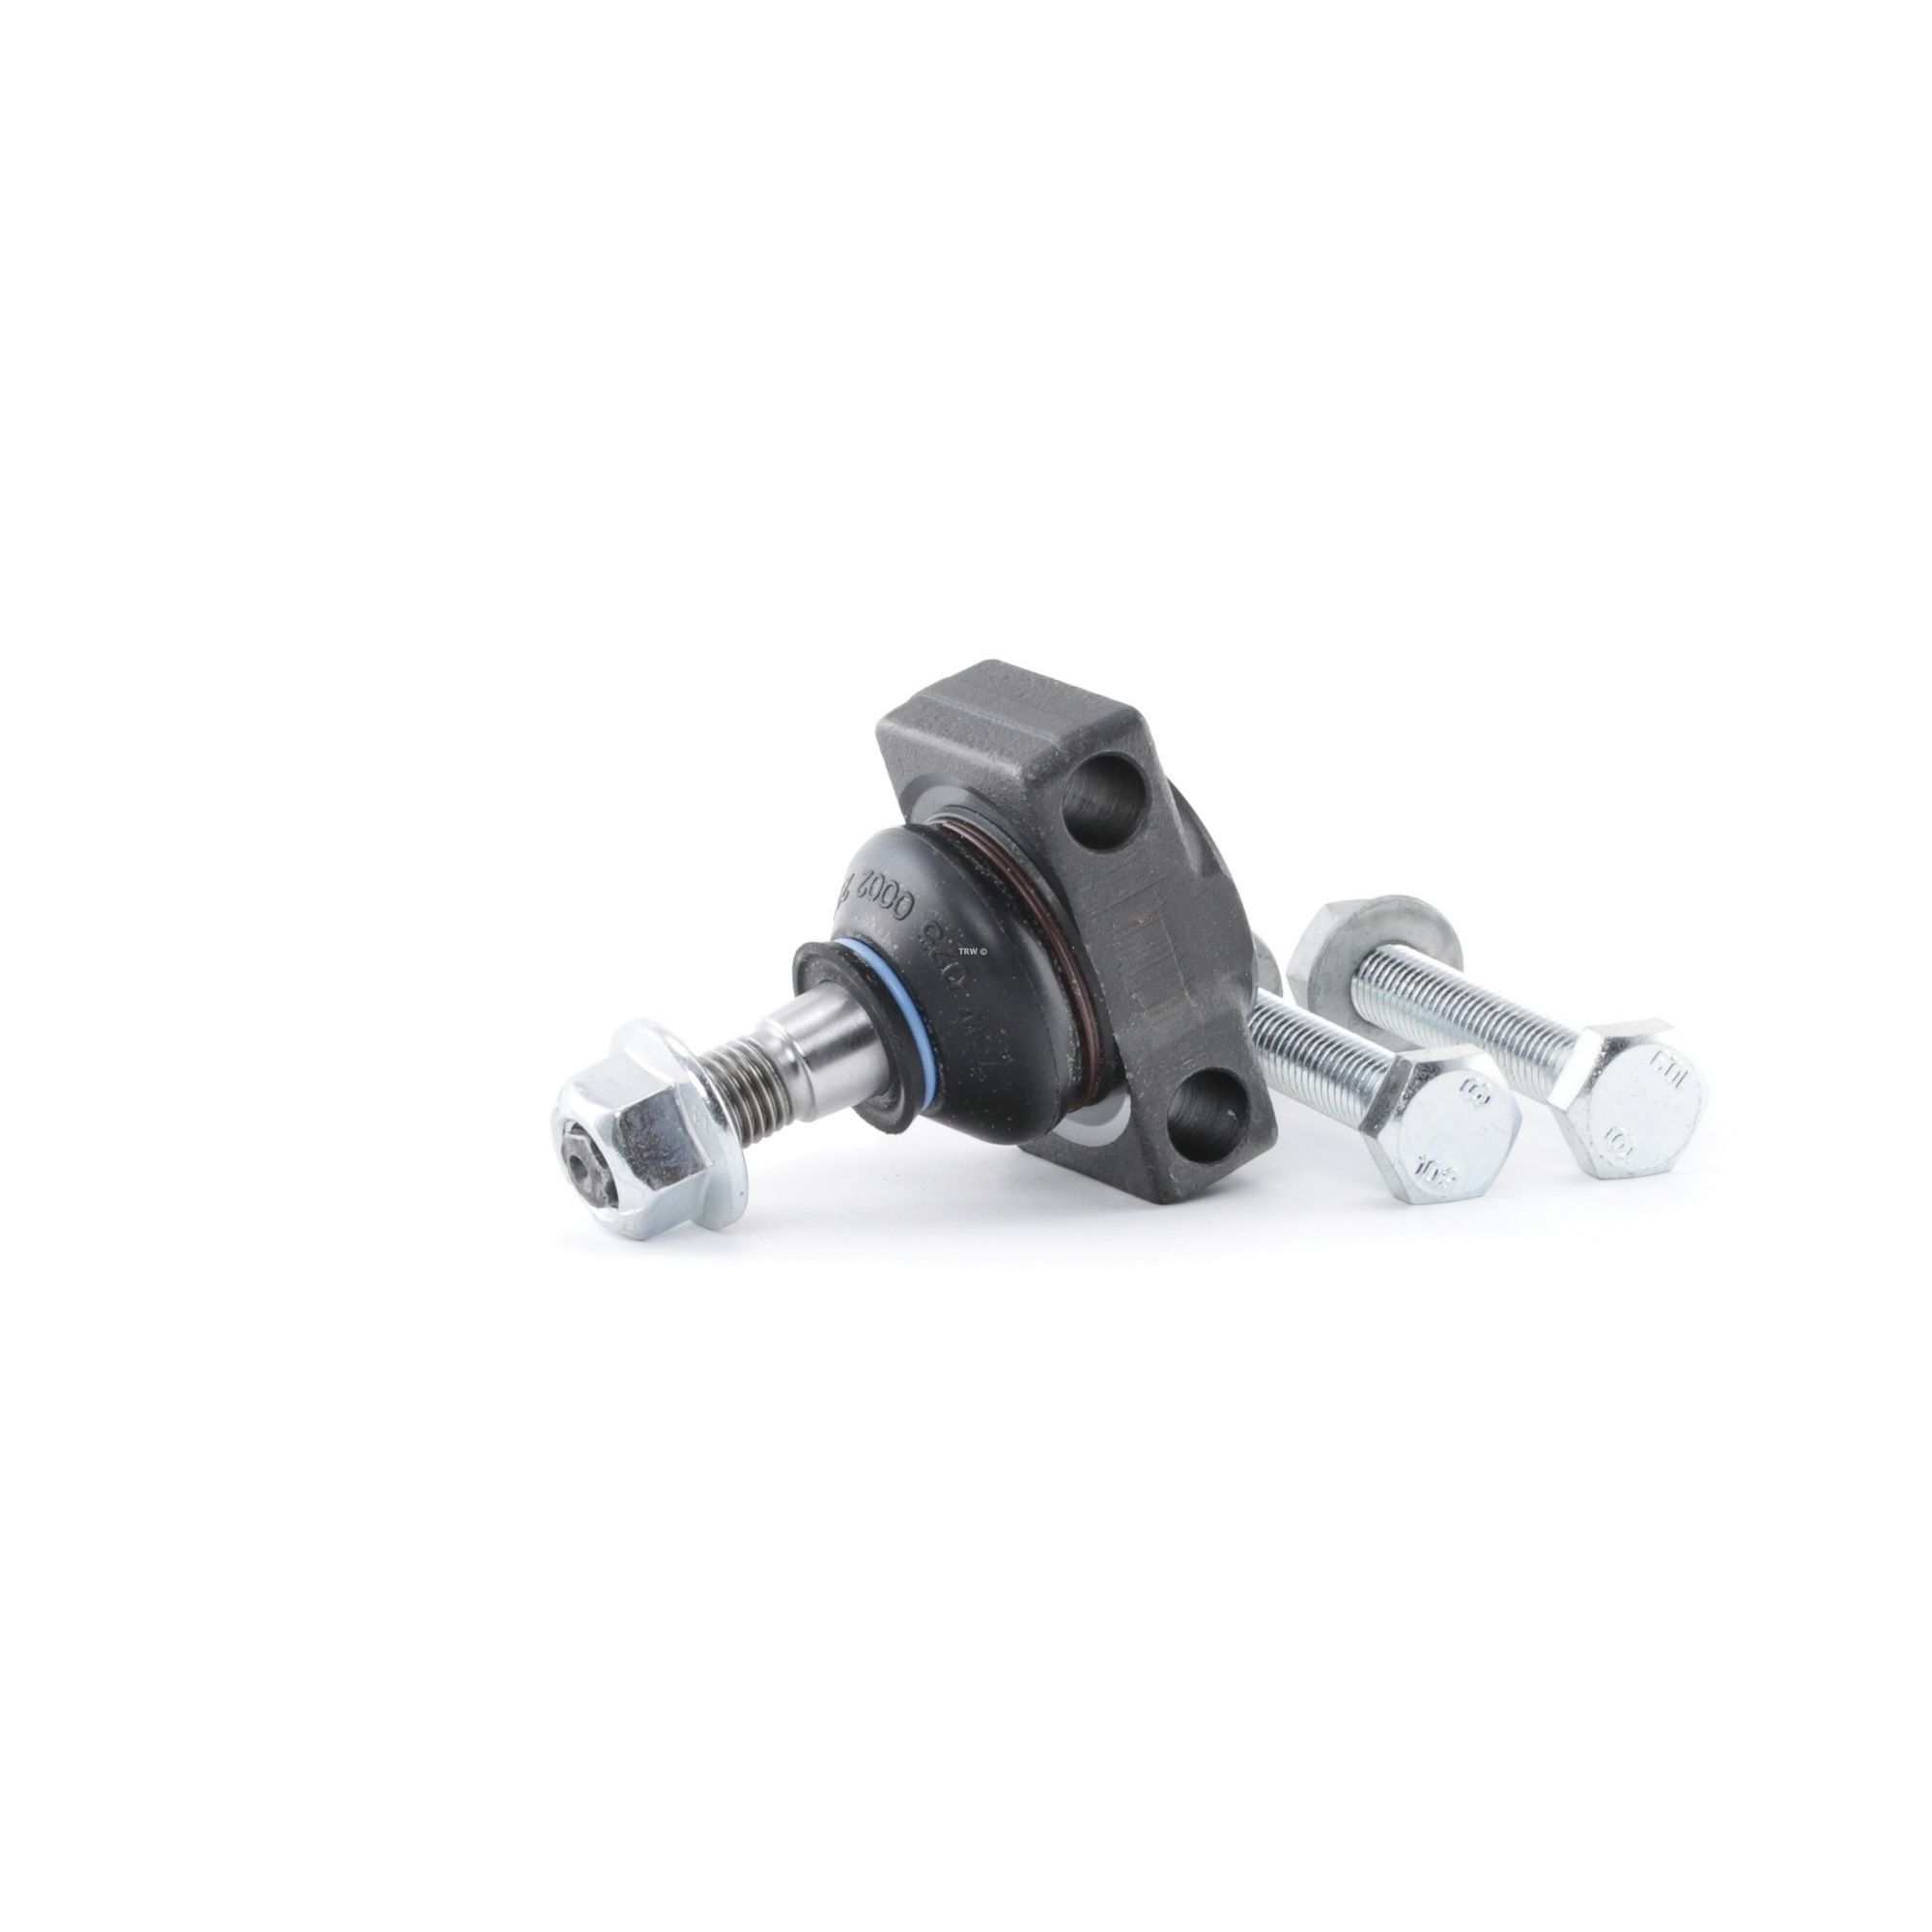 TRW JBJ785 Ball Joint with accessories, 13mm, 88mm, 1:8